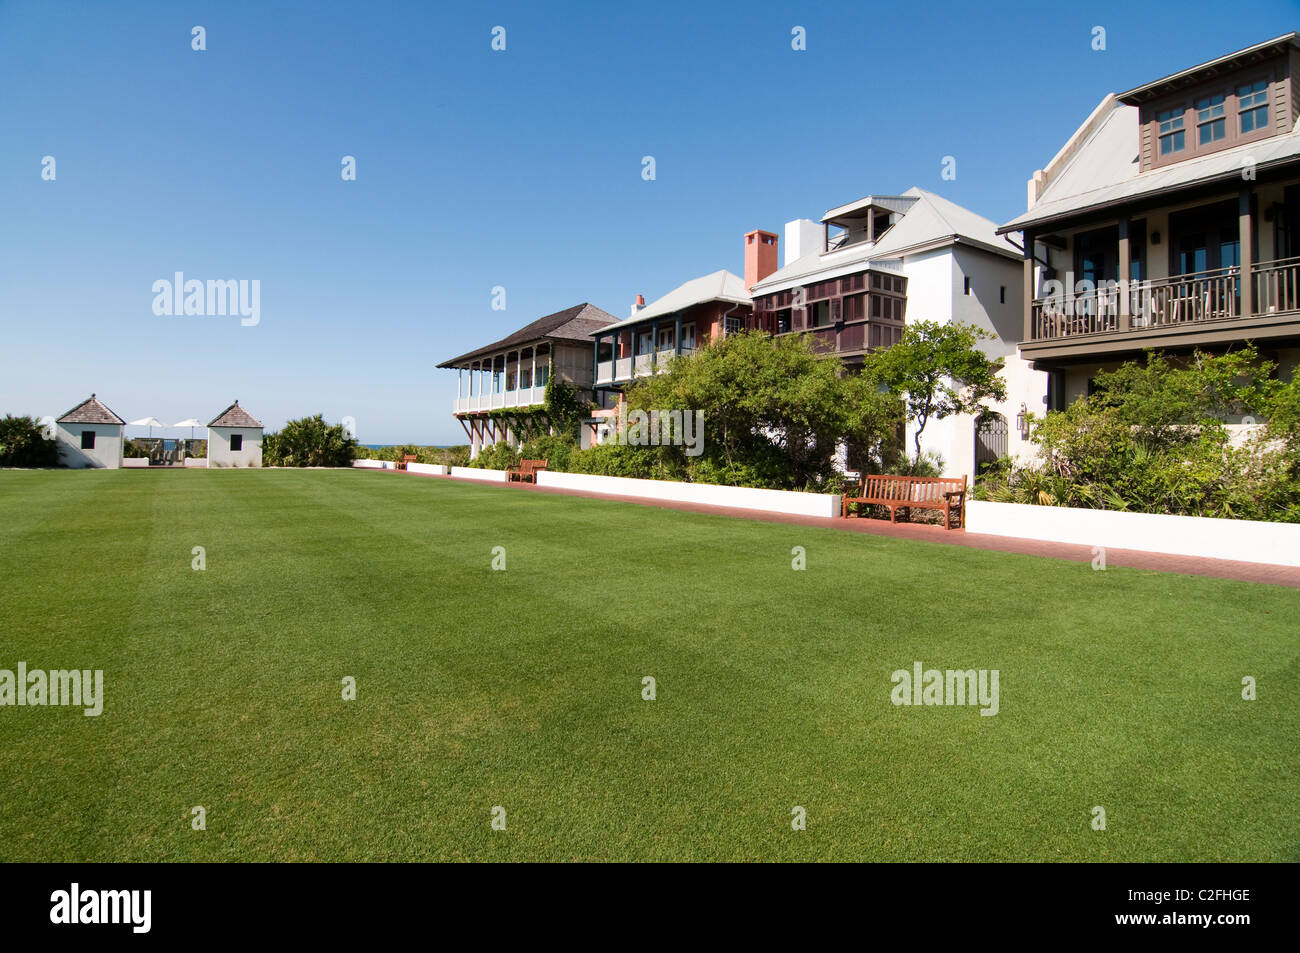 The Eastern Green of Rosemary Beach, Florida - a great place for playing frisbee as well as weddings. Stock Photo